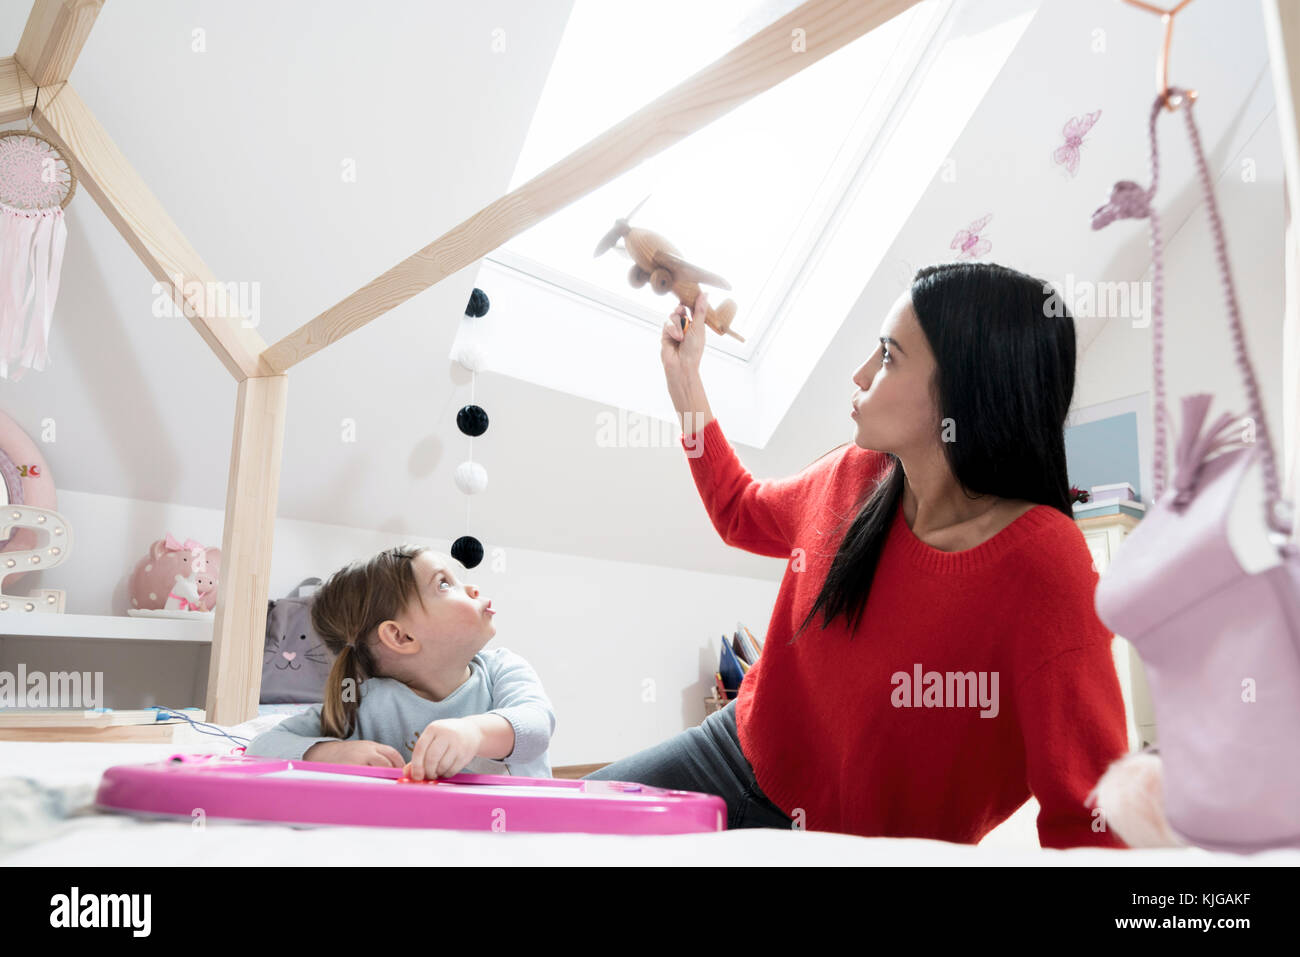 Mother and toddler daughter playing with toy plane in nursery Stock Photo